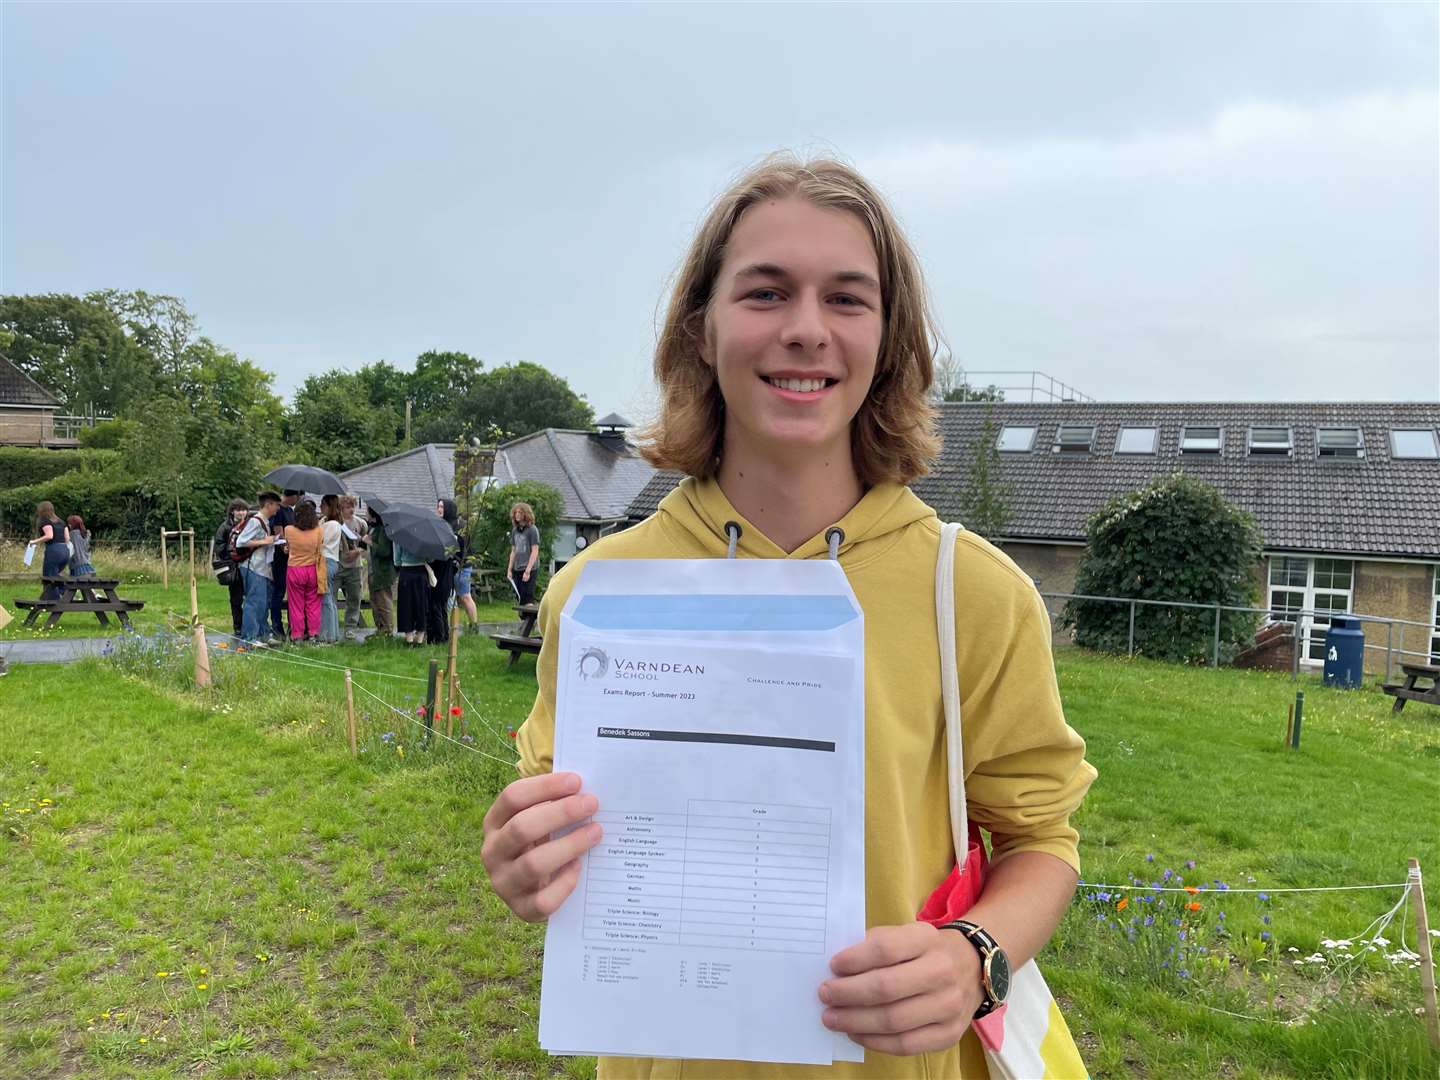 Ben Sassons, 16, with his GCSE results at Varndean School in Brighton (Anahita Hossein-Pour/PA)